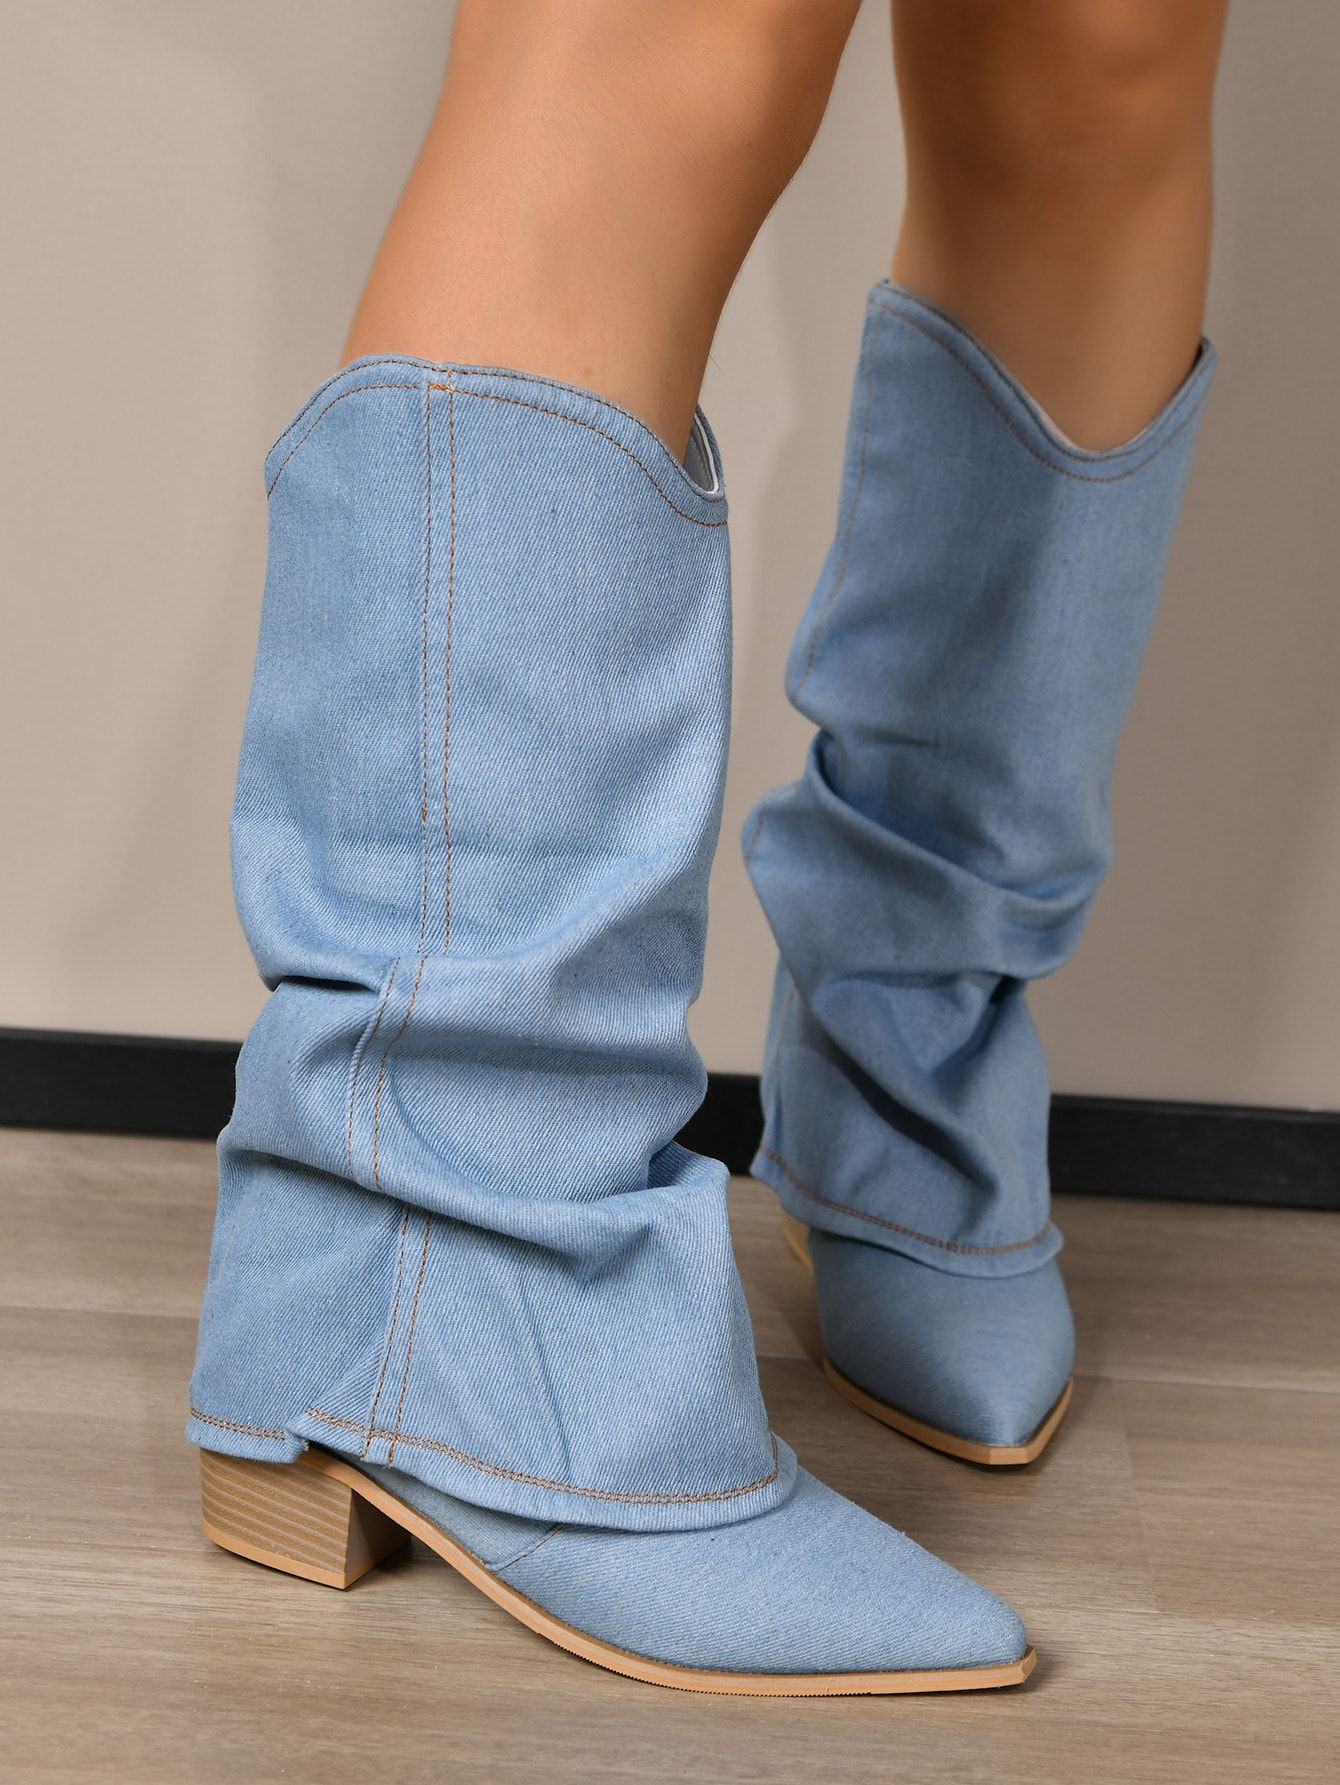 Western Style Cowgirl Boots For Women, Fashionable Over-the-knee Denim Boots, Light Blue | SHEIN